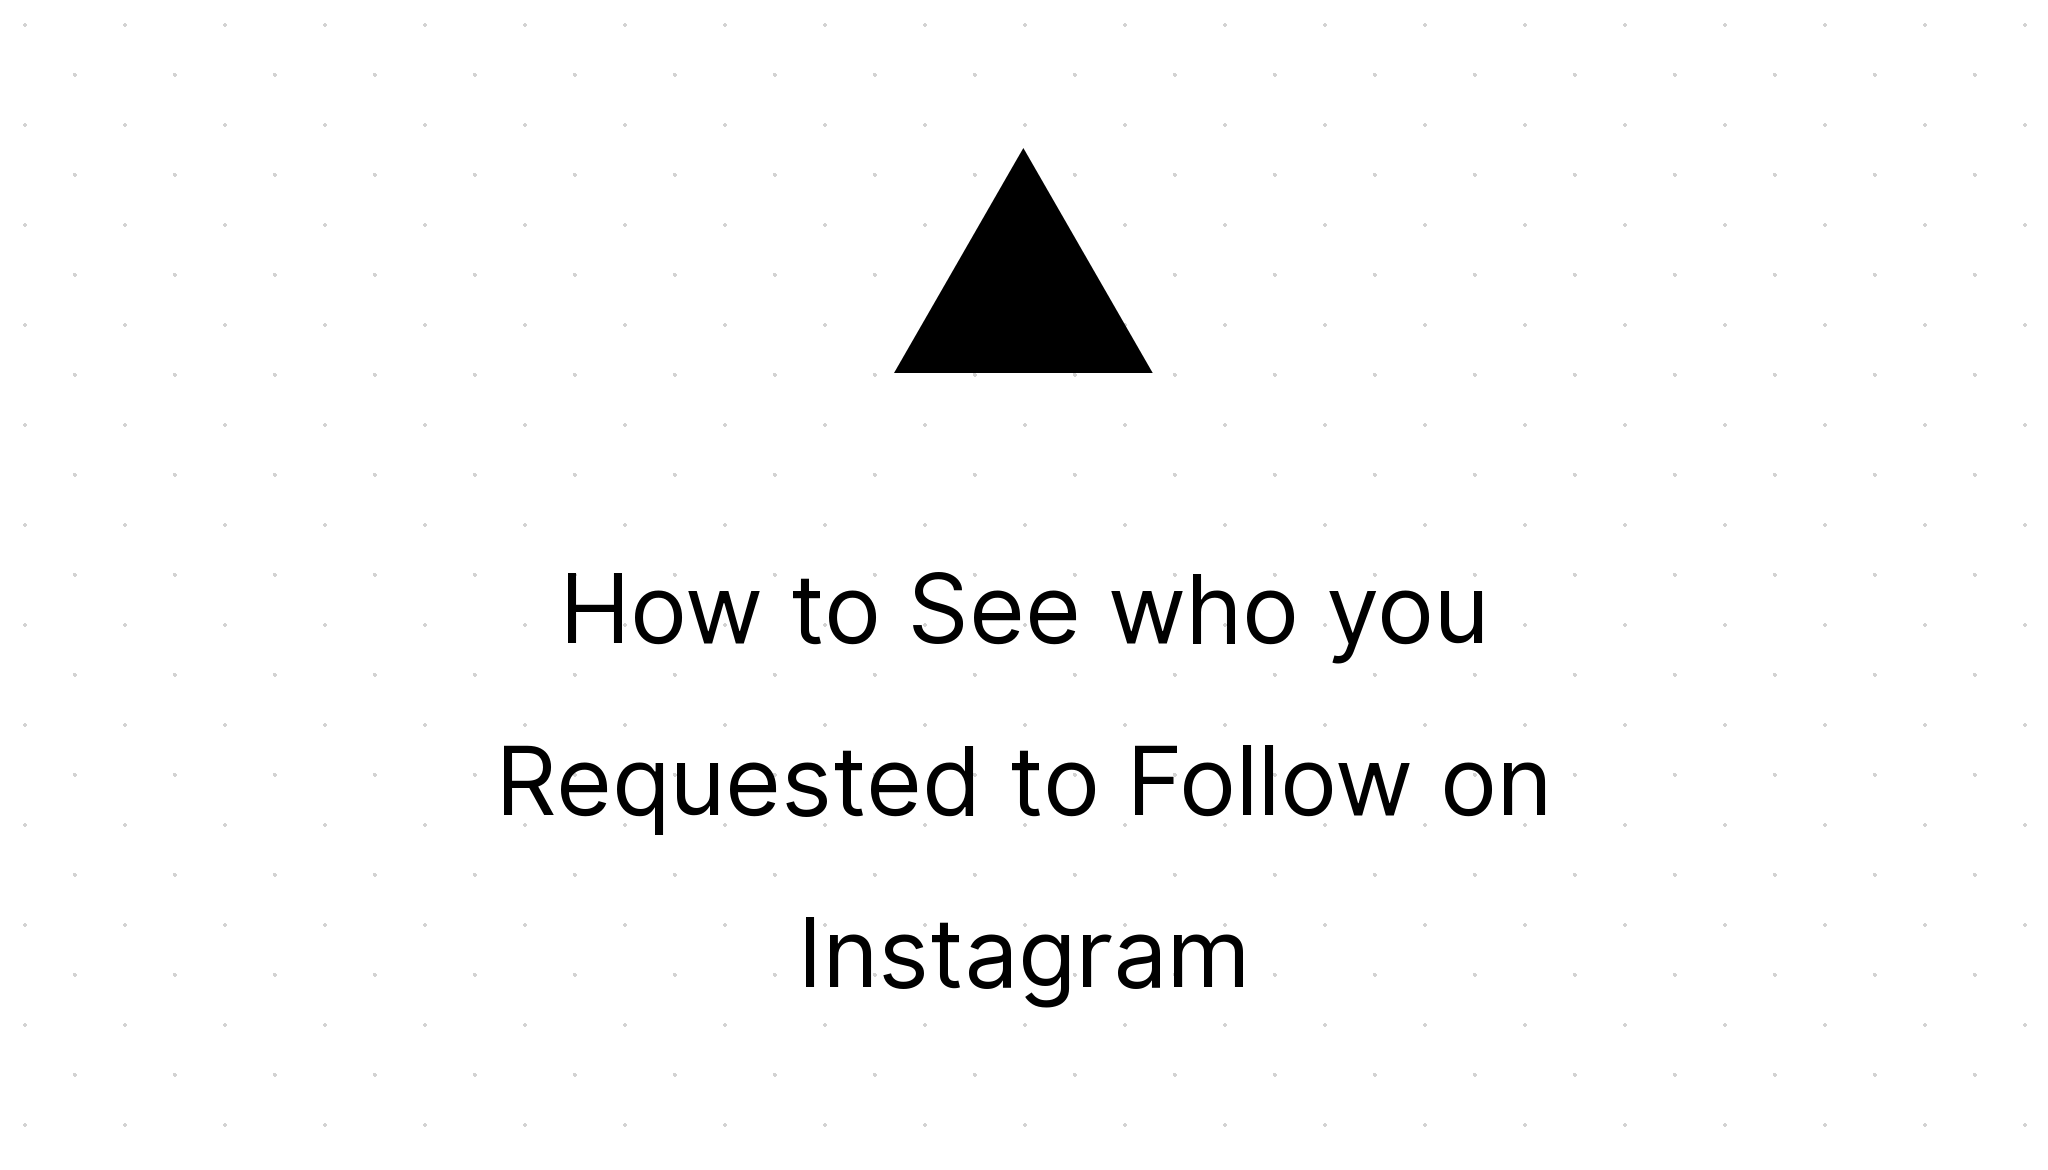 How to See who you Requested to Follow on Instagram